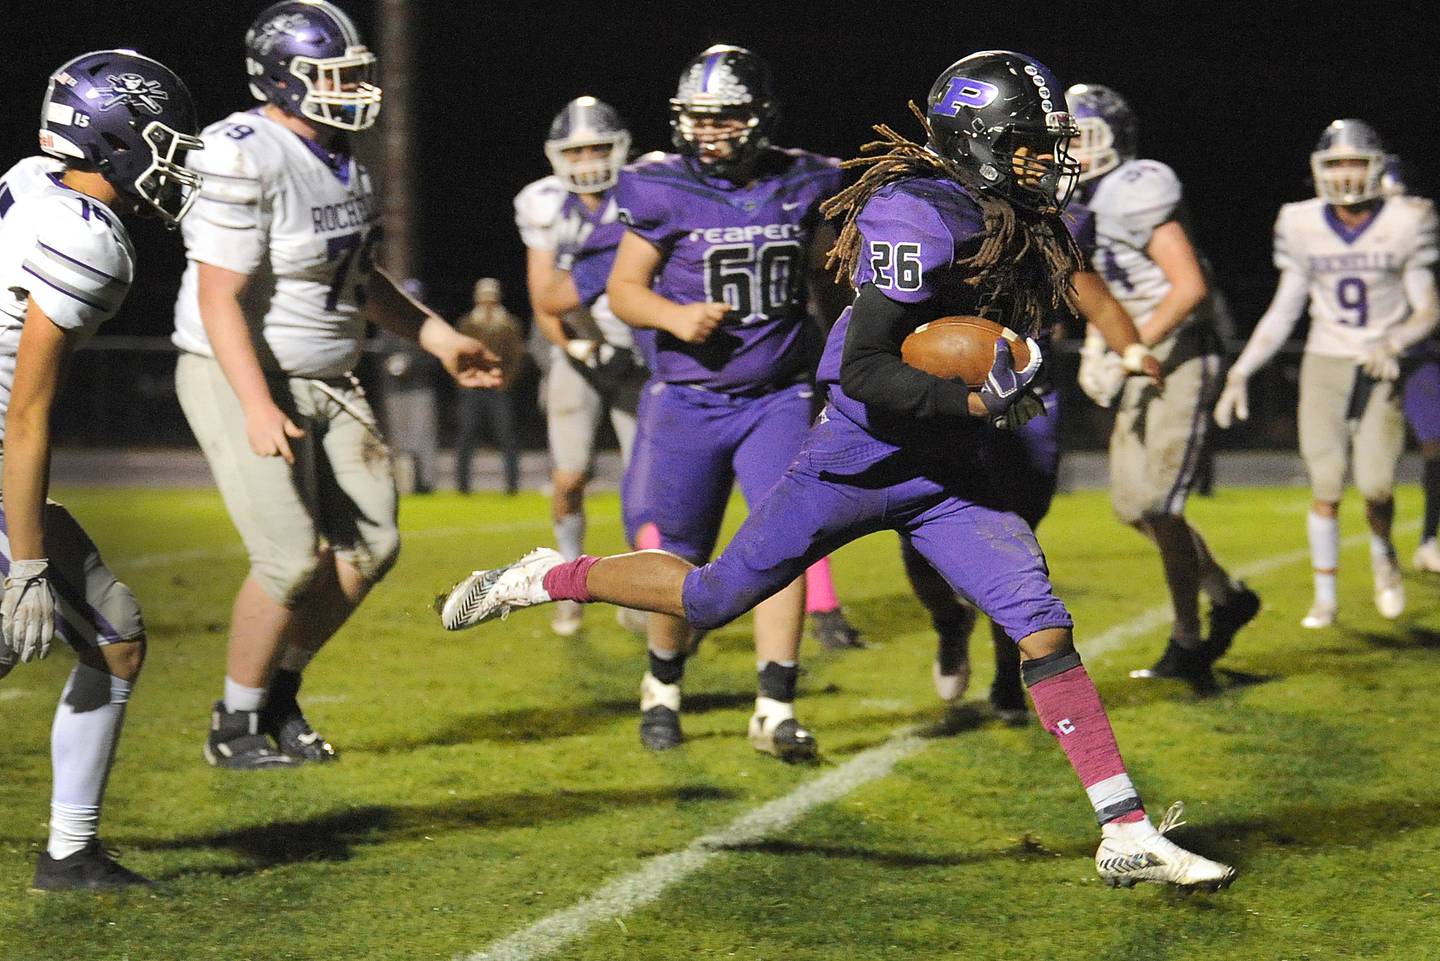 Plano runningback Da'Ziyon Wright (26) hops into the endzone for a touchdown against the Rochelle defense during a varsity football game at Plano High School on Friday.